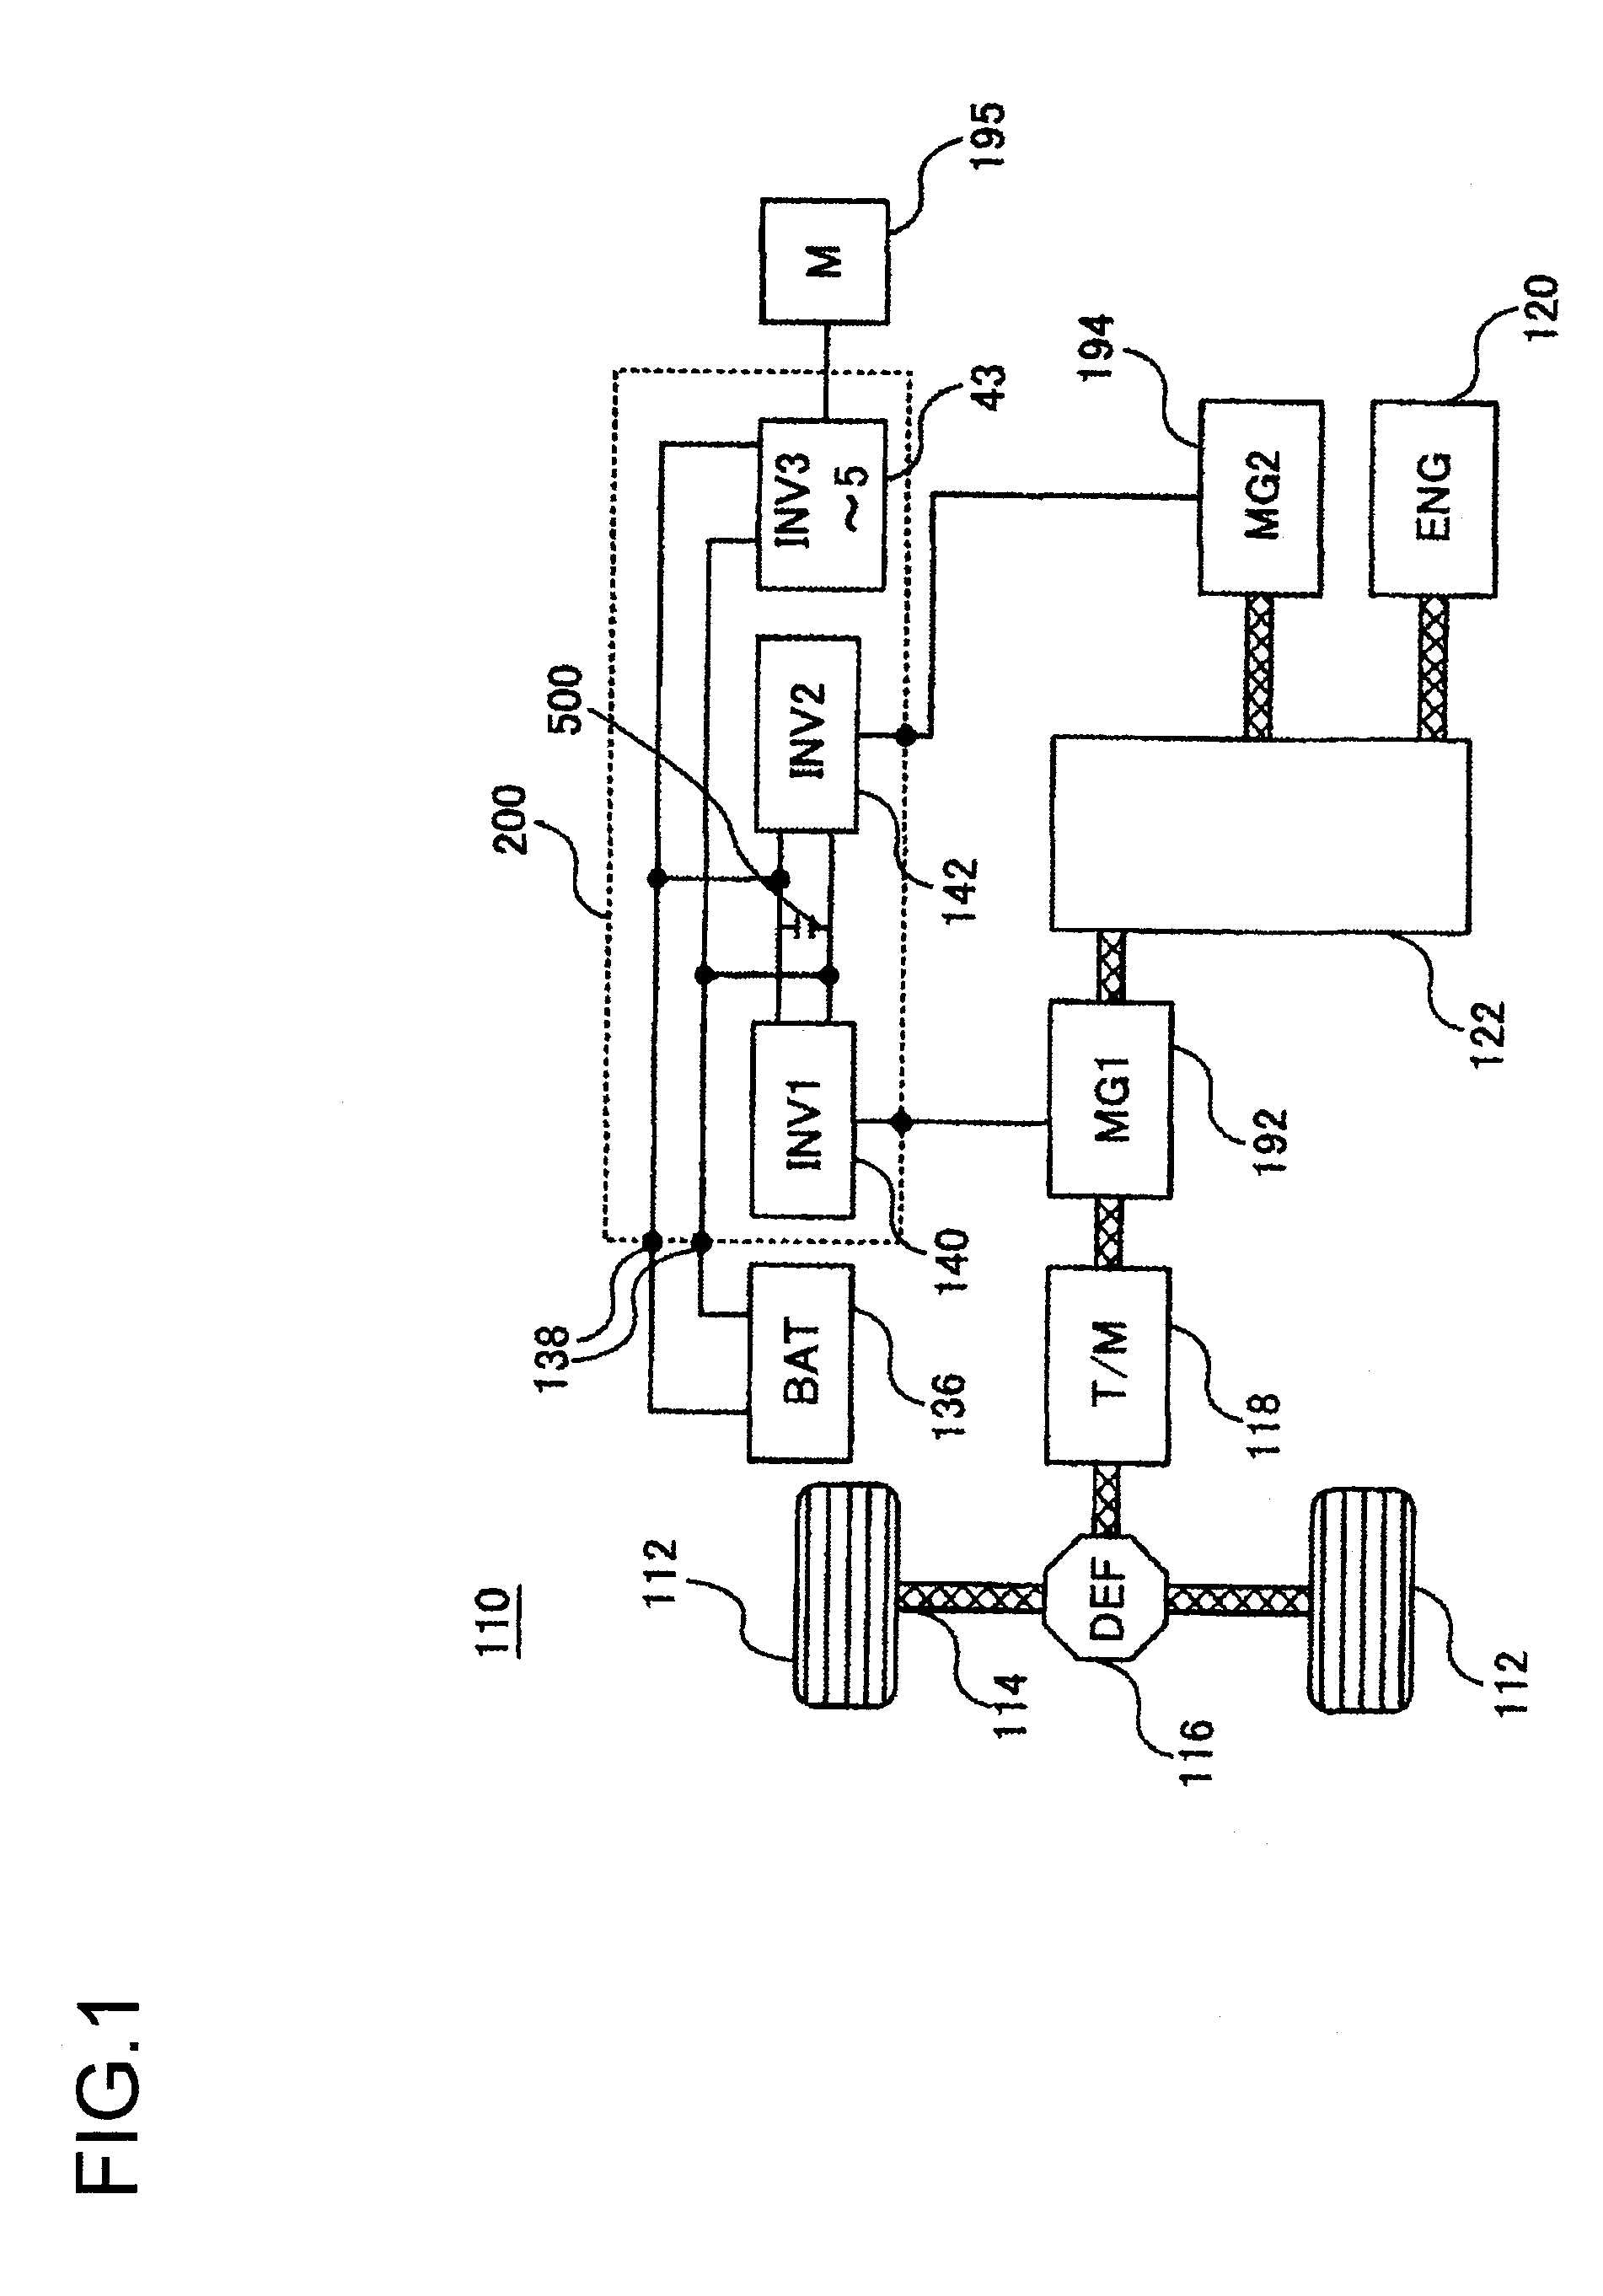 Power Module and Power Conversion Device